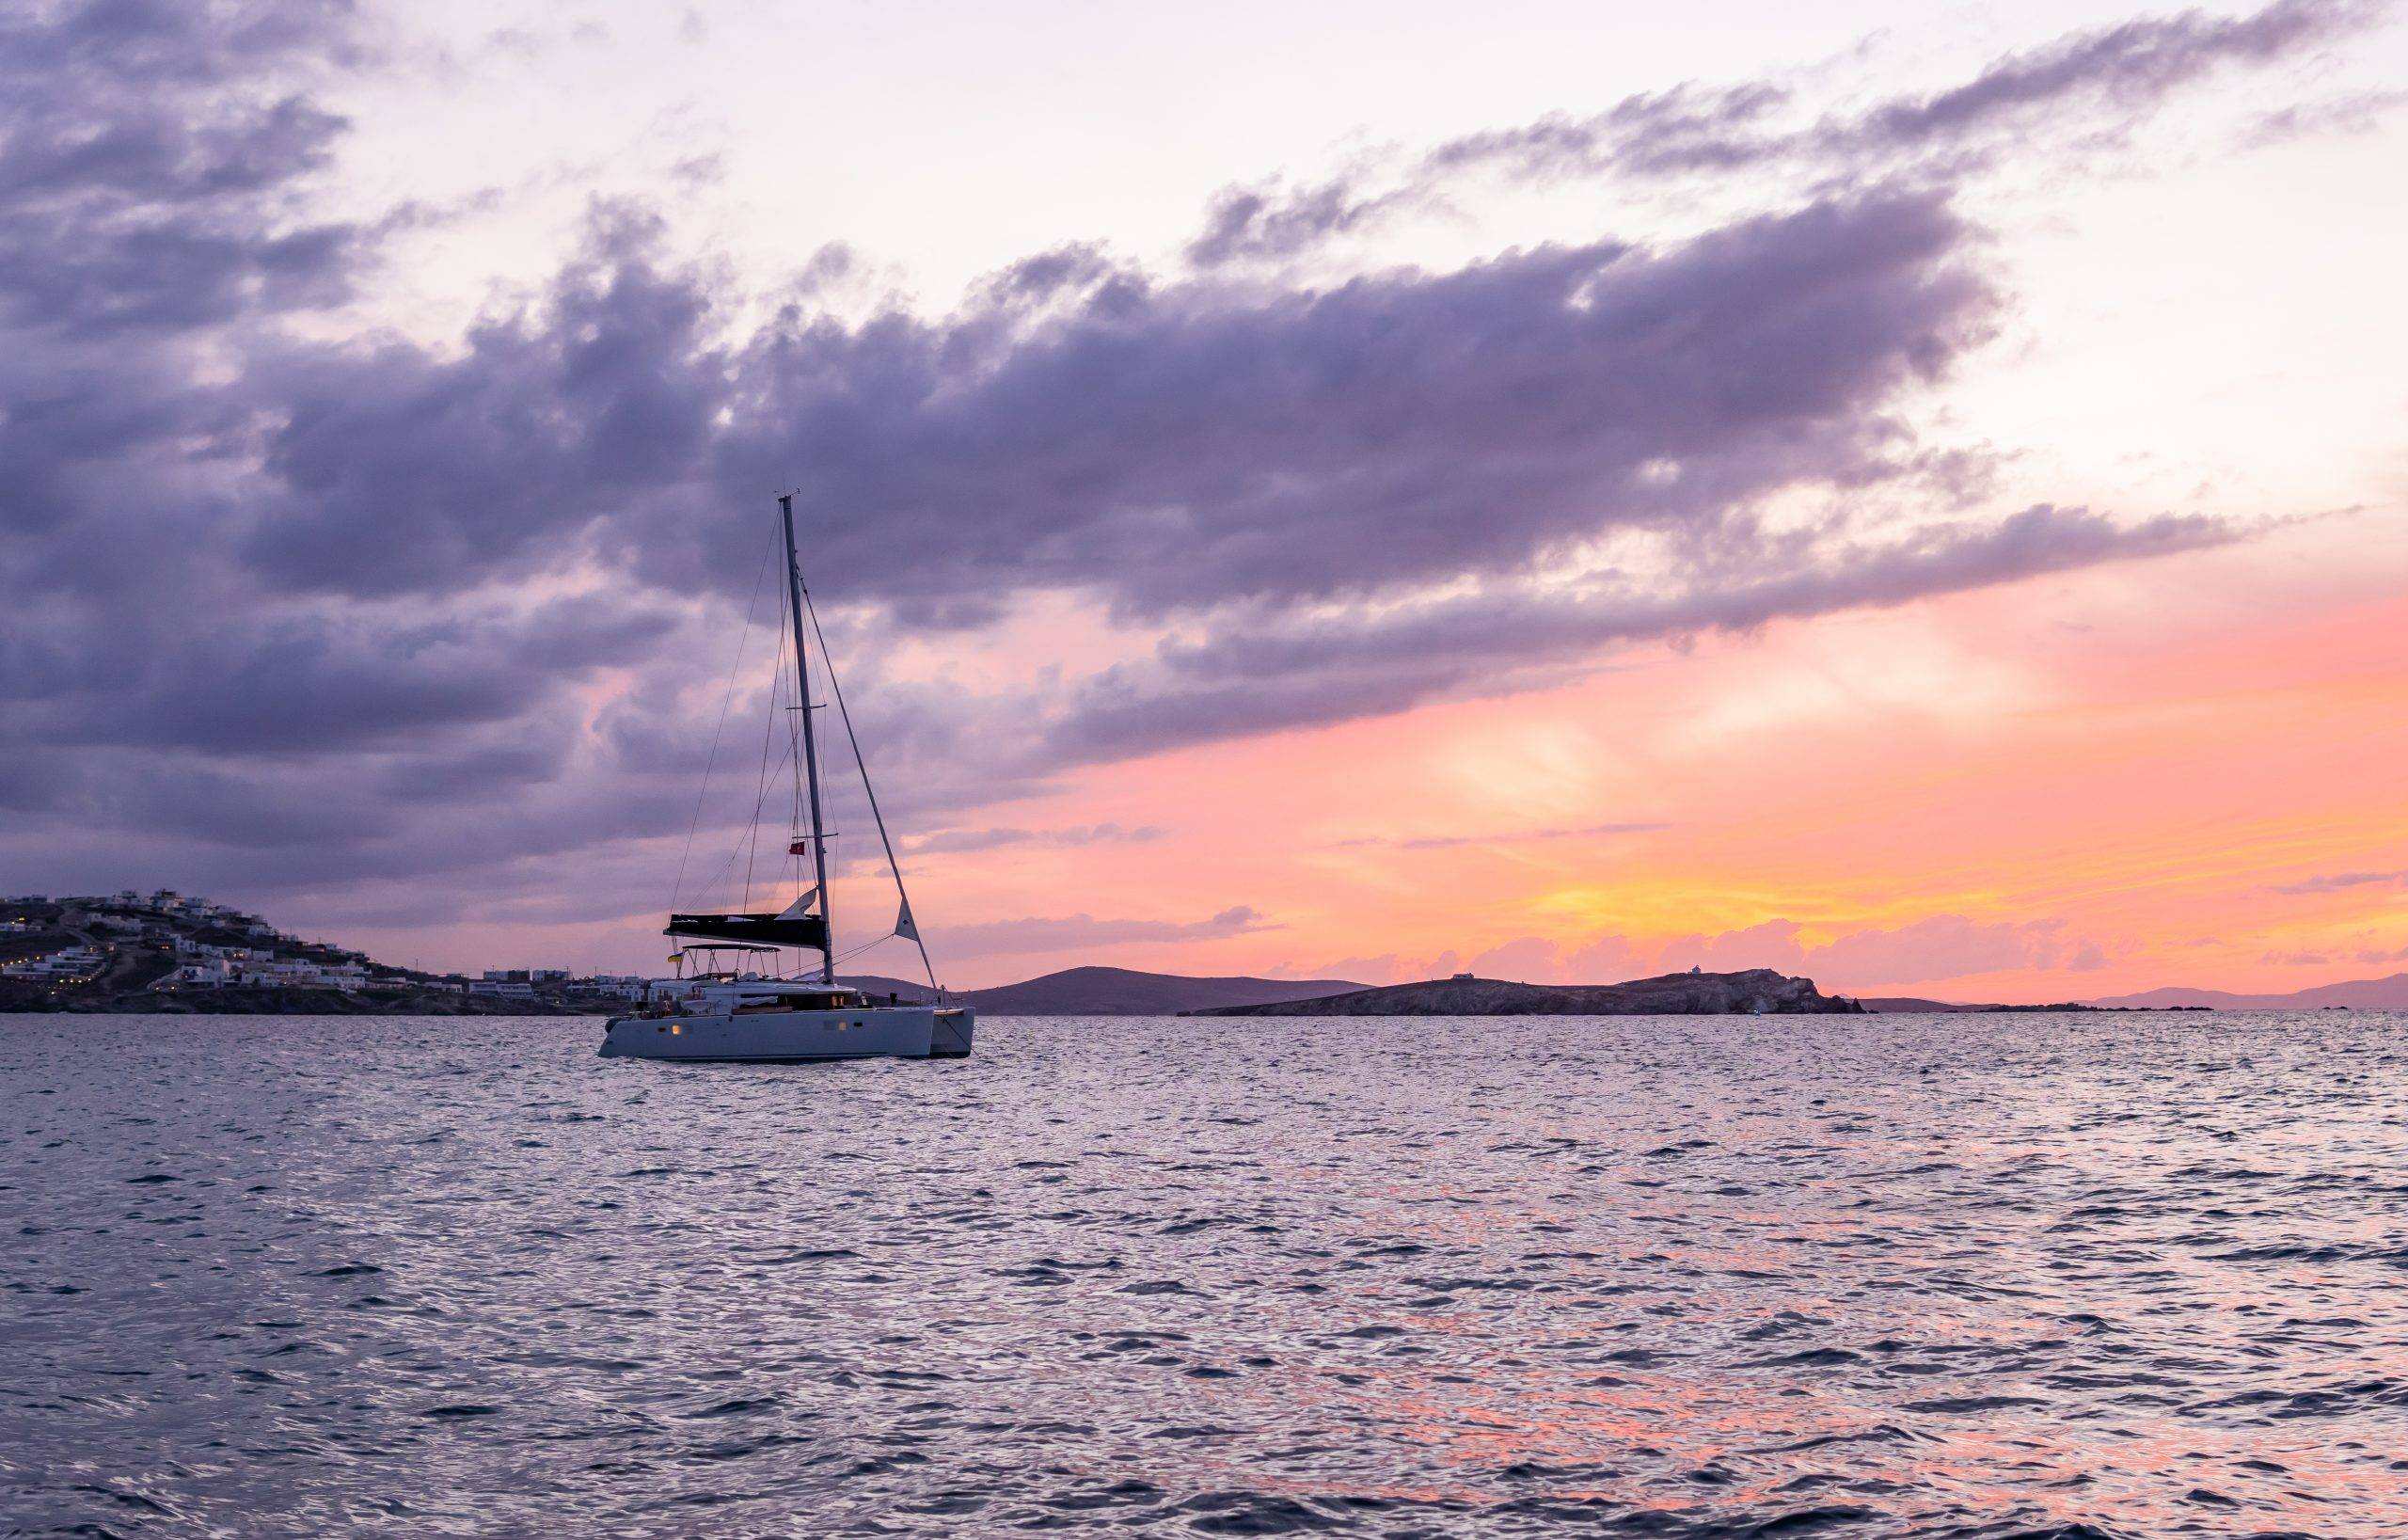 7 Minimalist Ways to Deal With Uncertainty in Your Life - featured -sailing catamaran at sunset in Mykonos, Greece